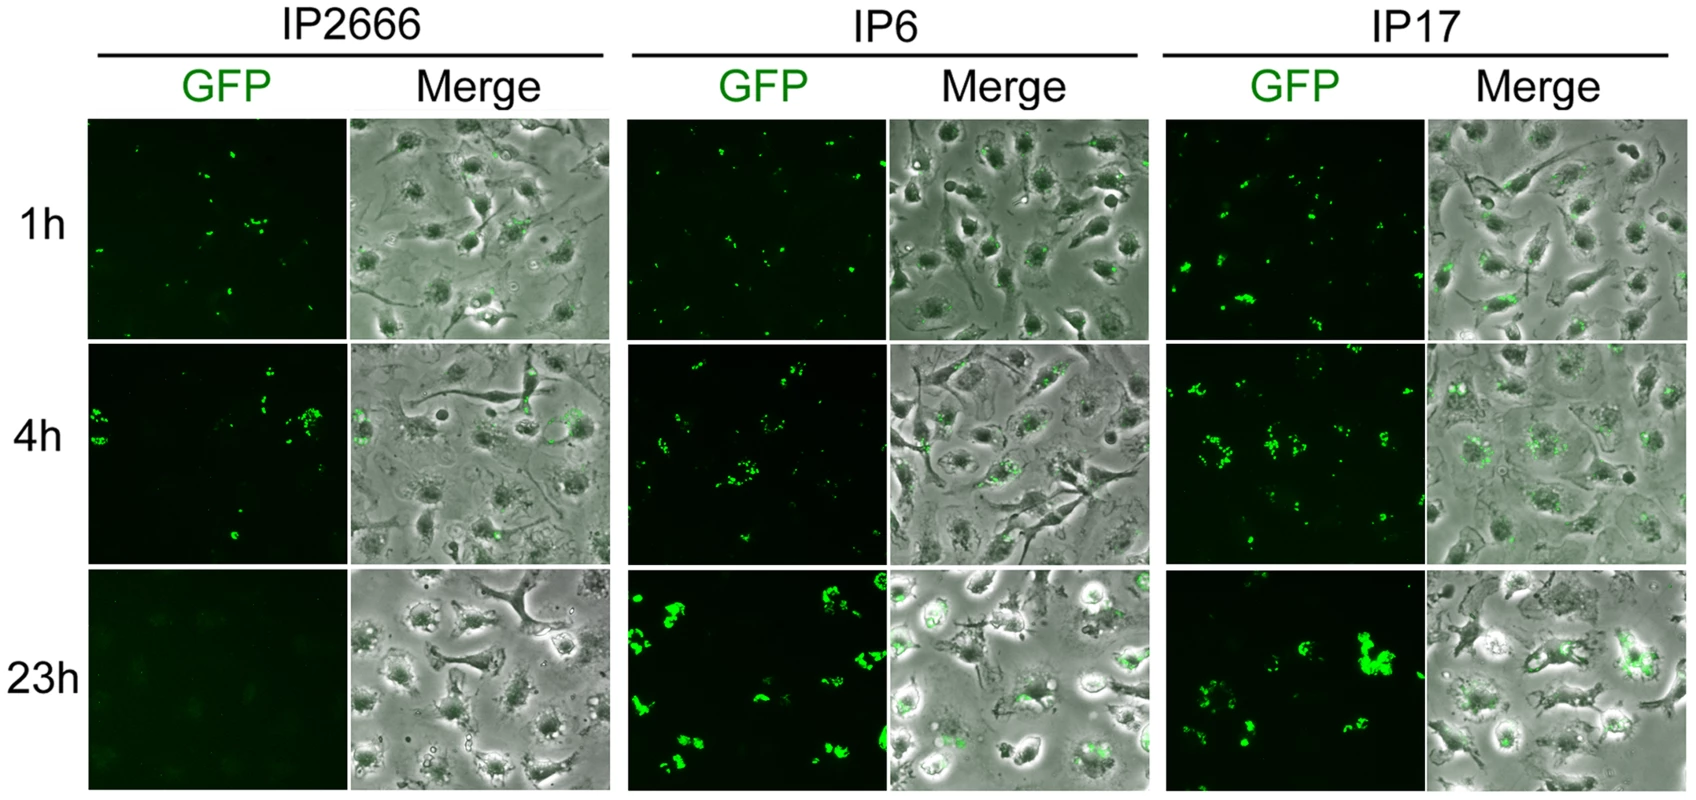 Comparison of different <i>Y. pseudotuberculosis</i> strains for survival inside macrophages as determined by fluorescence microcopy.